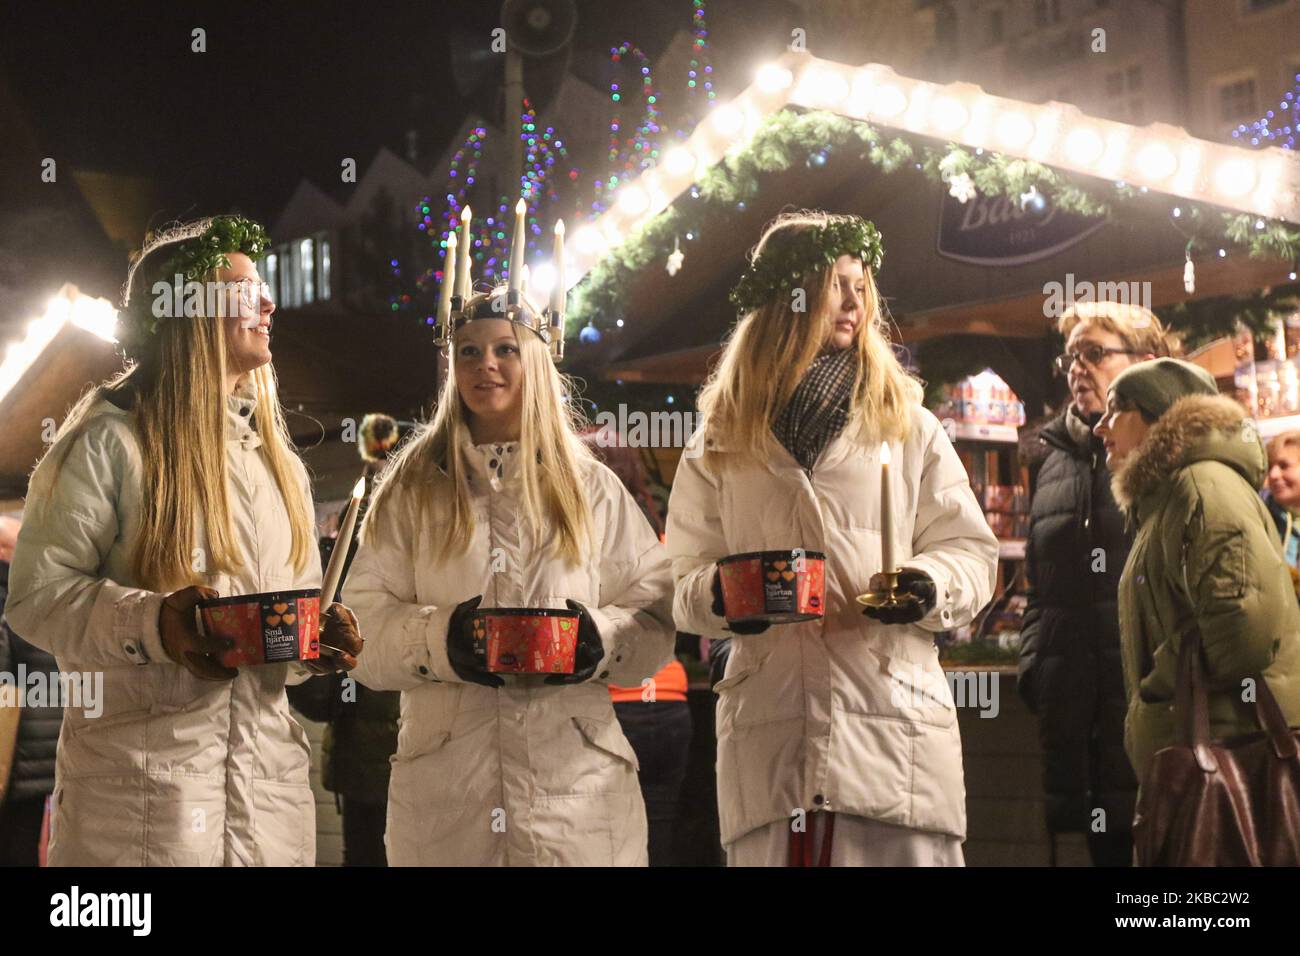 Young girls from Kalmar, Sweden dressed in a white dress and a red sash (as the symbol of martyrdom) carries candles in proccesion along the Gdansk Christmas Fair on the Old City centre area are seen in Gdansk, Poland on 2 December 2019 . One of them wears a crown of candles on her head. Girls dressed as Saint Lucy (Sankta Lucia) carry cookies in procession and sing a songs. It is said that to vividly celebrate St. Lucy's Day will help one live the long winter days with enough light. (Photo by Michal Fludra/NurPhoto) Stock Photo